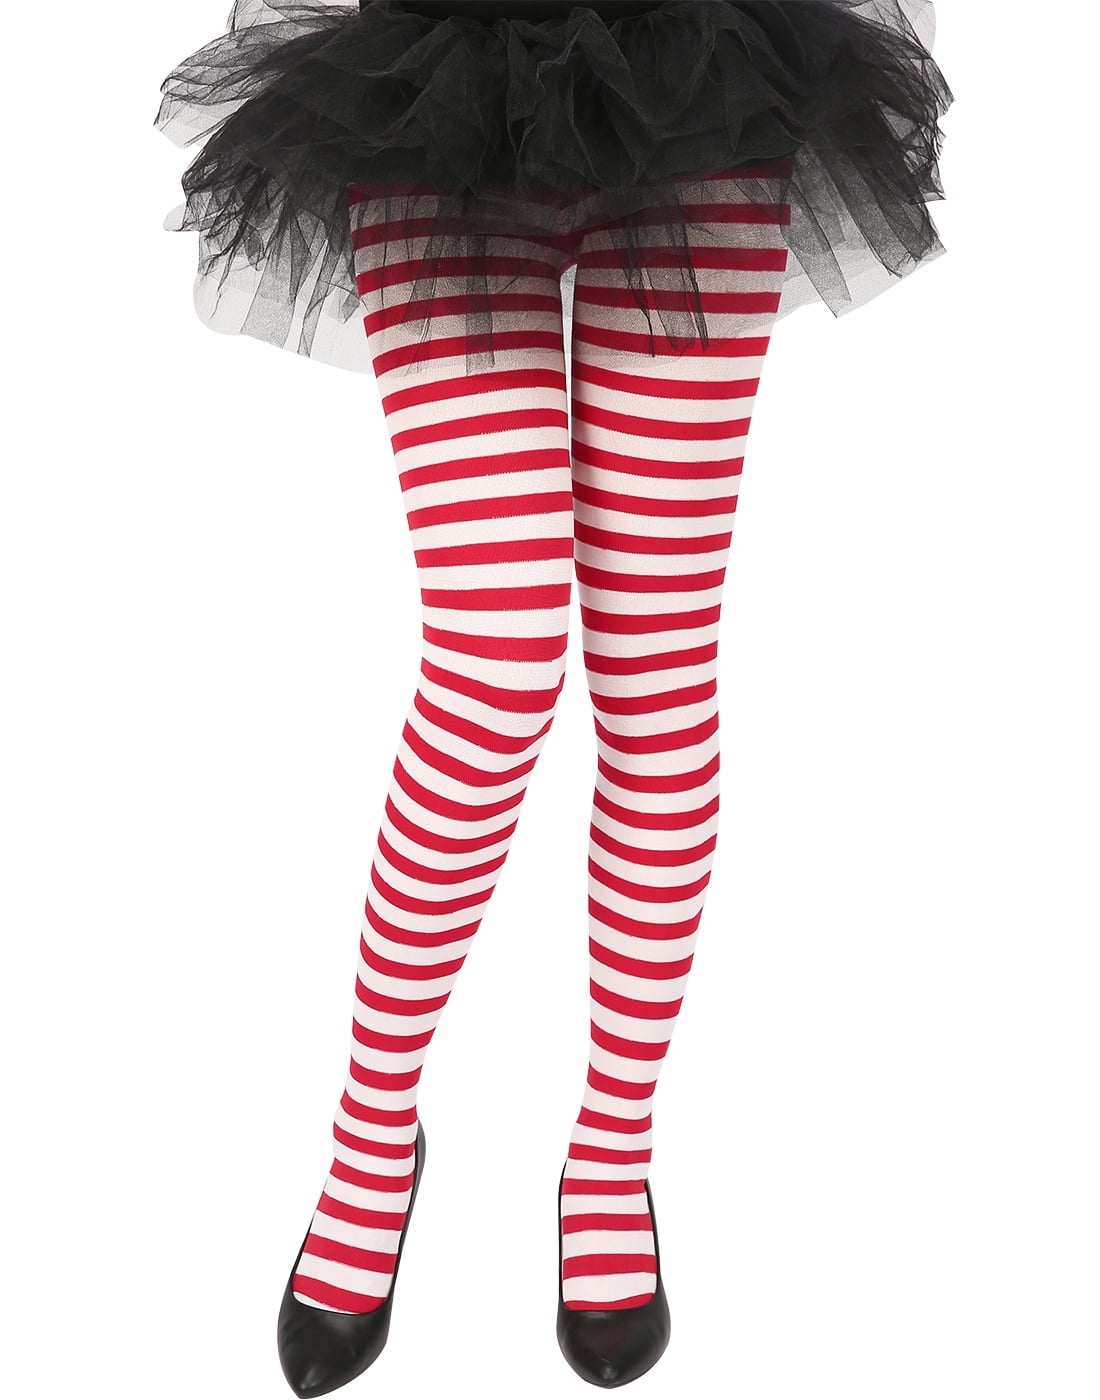 Women Lady Red & Green Stripy Pattern Burlesque Hoise Pantyhose Tights One Size 